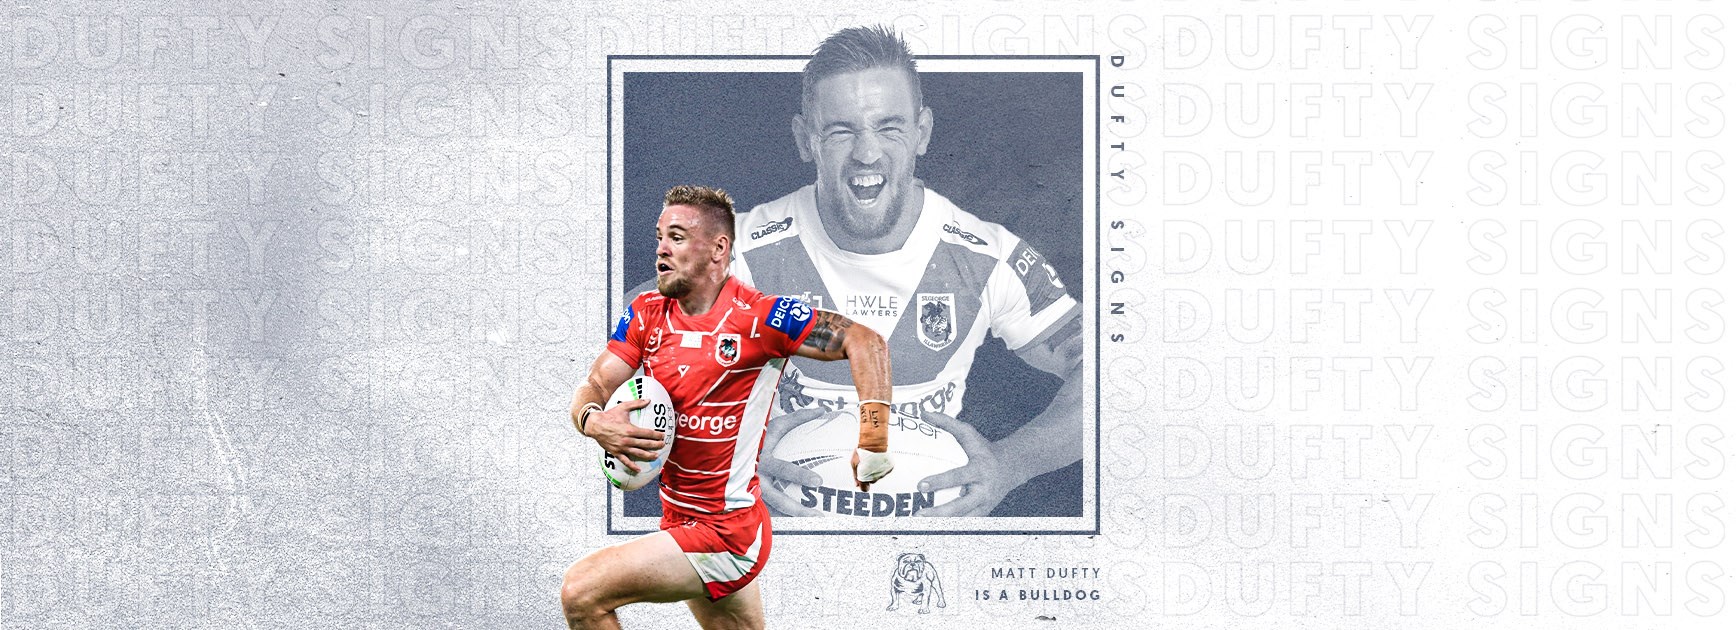 Matt Dufty signs with the Bulldogs for season 2022